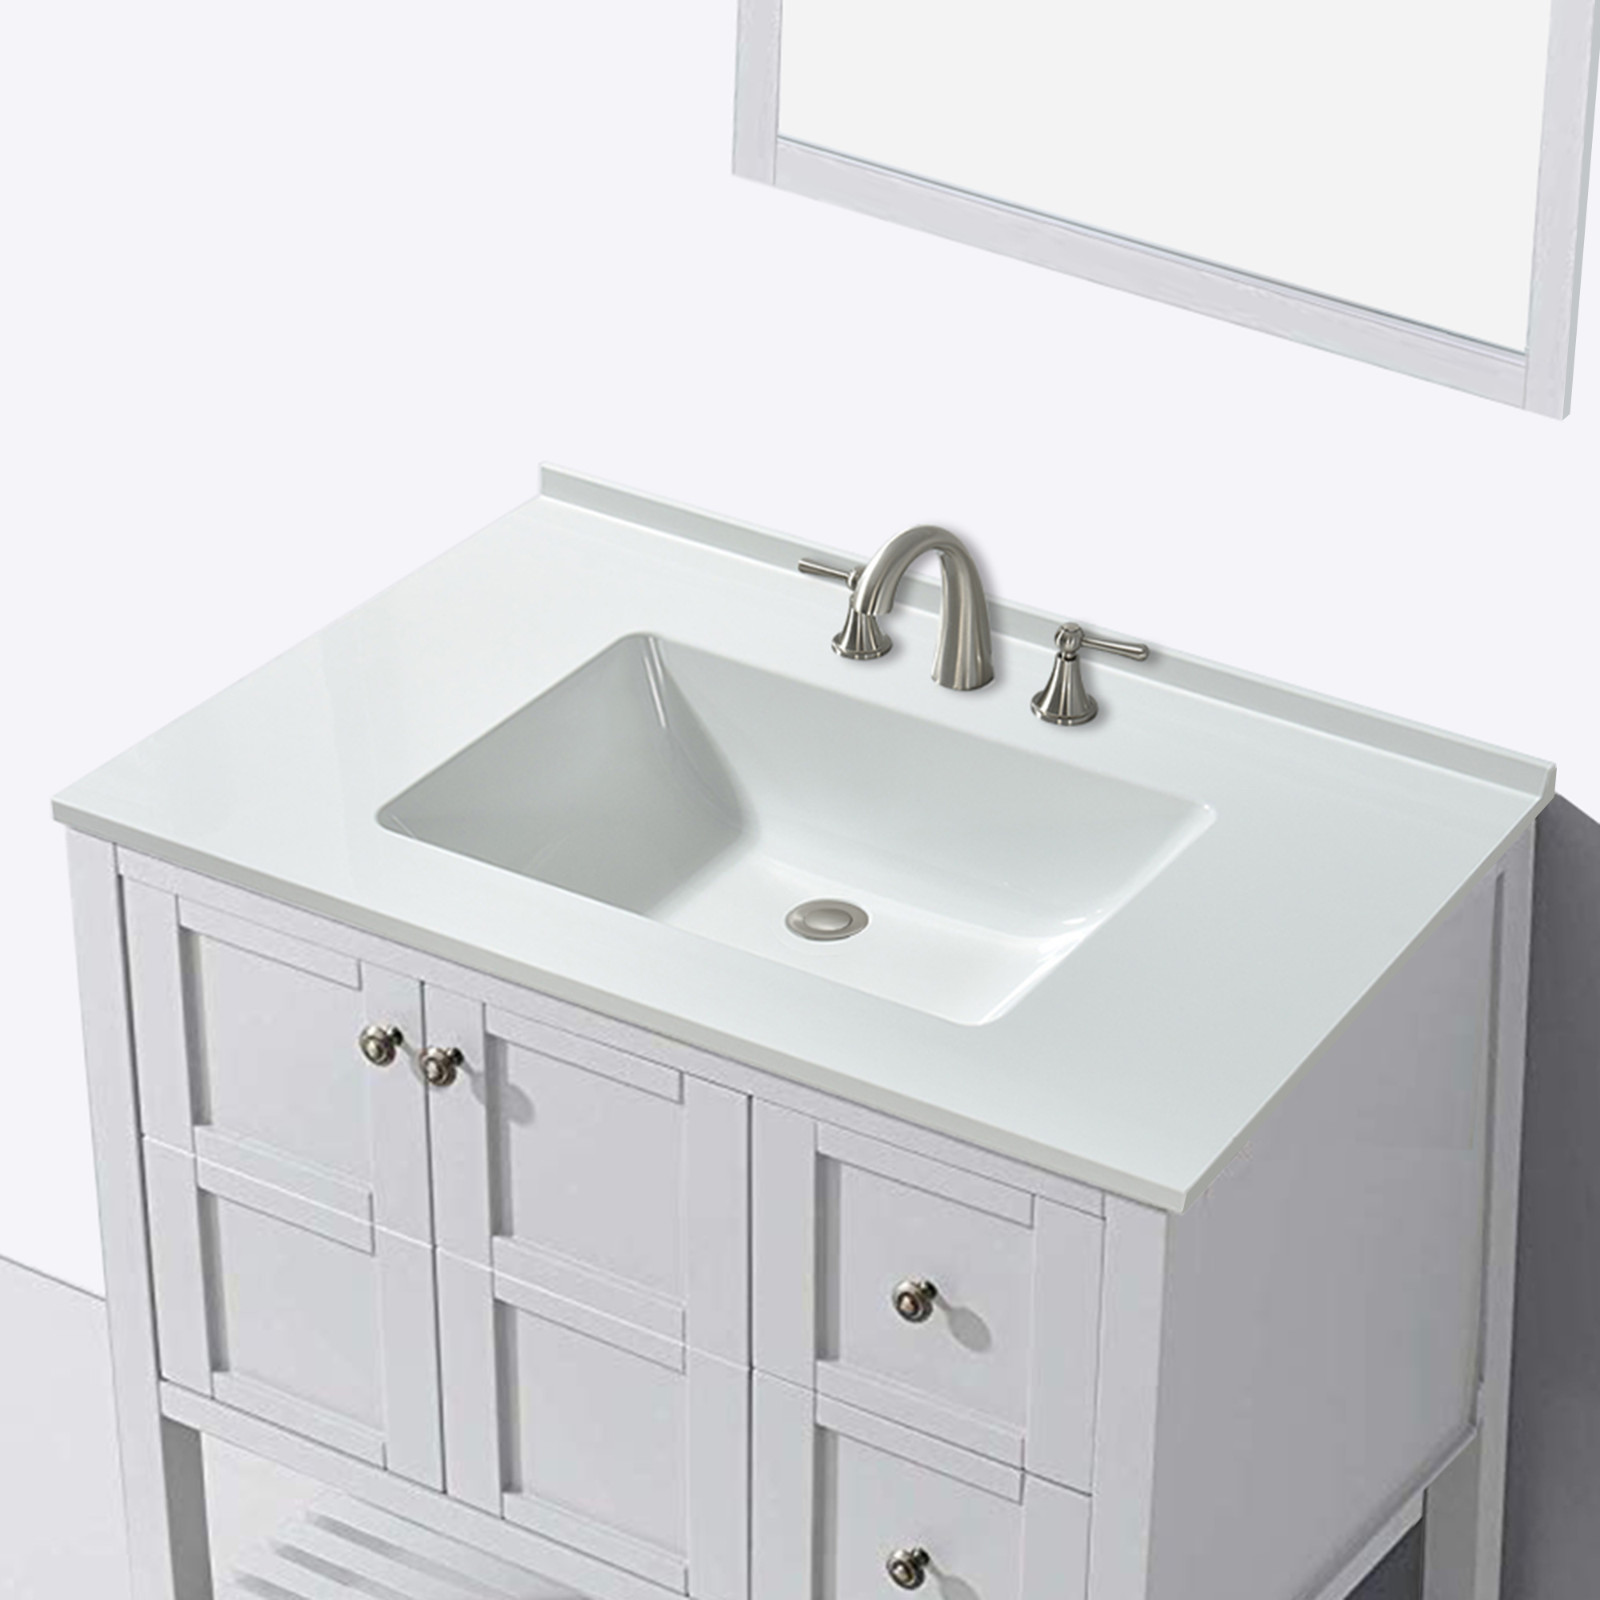  WOODBRIDGE VT3719-1000 Solid Surface Vanity Top with with Intergrated Sink and 3 Faucet Holes for 4-Inch Centerset Faucet, 37